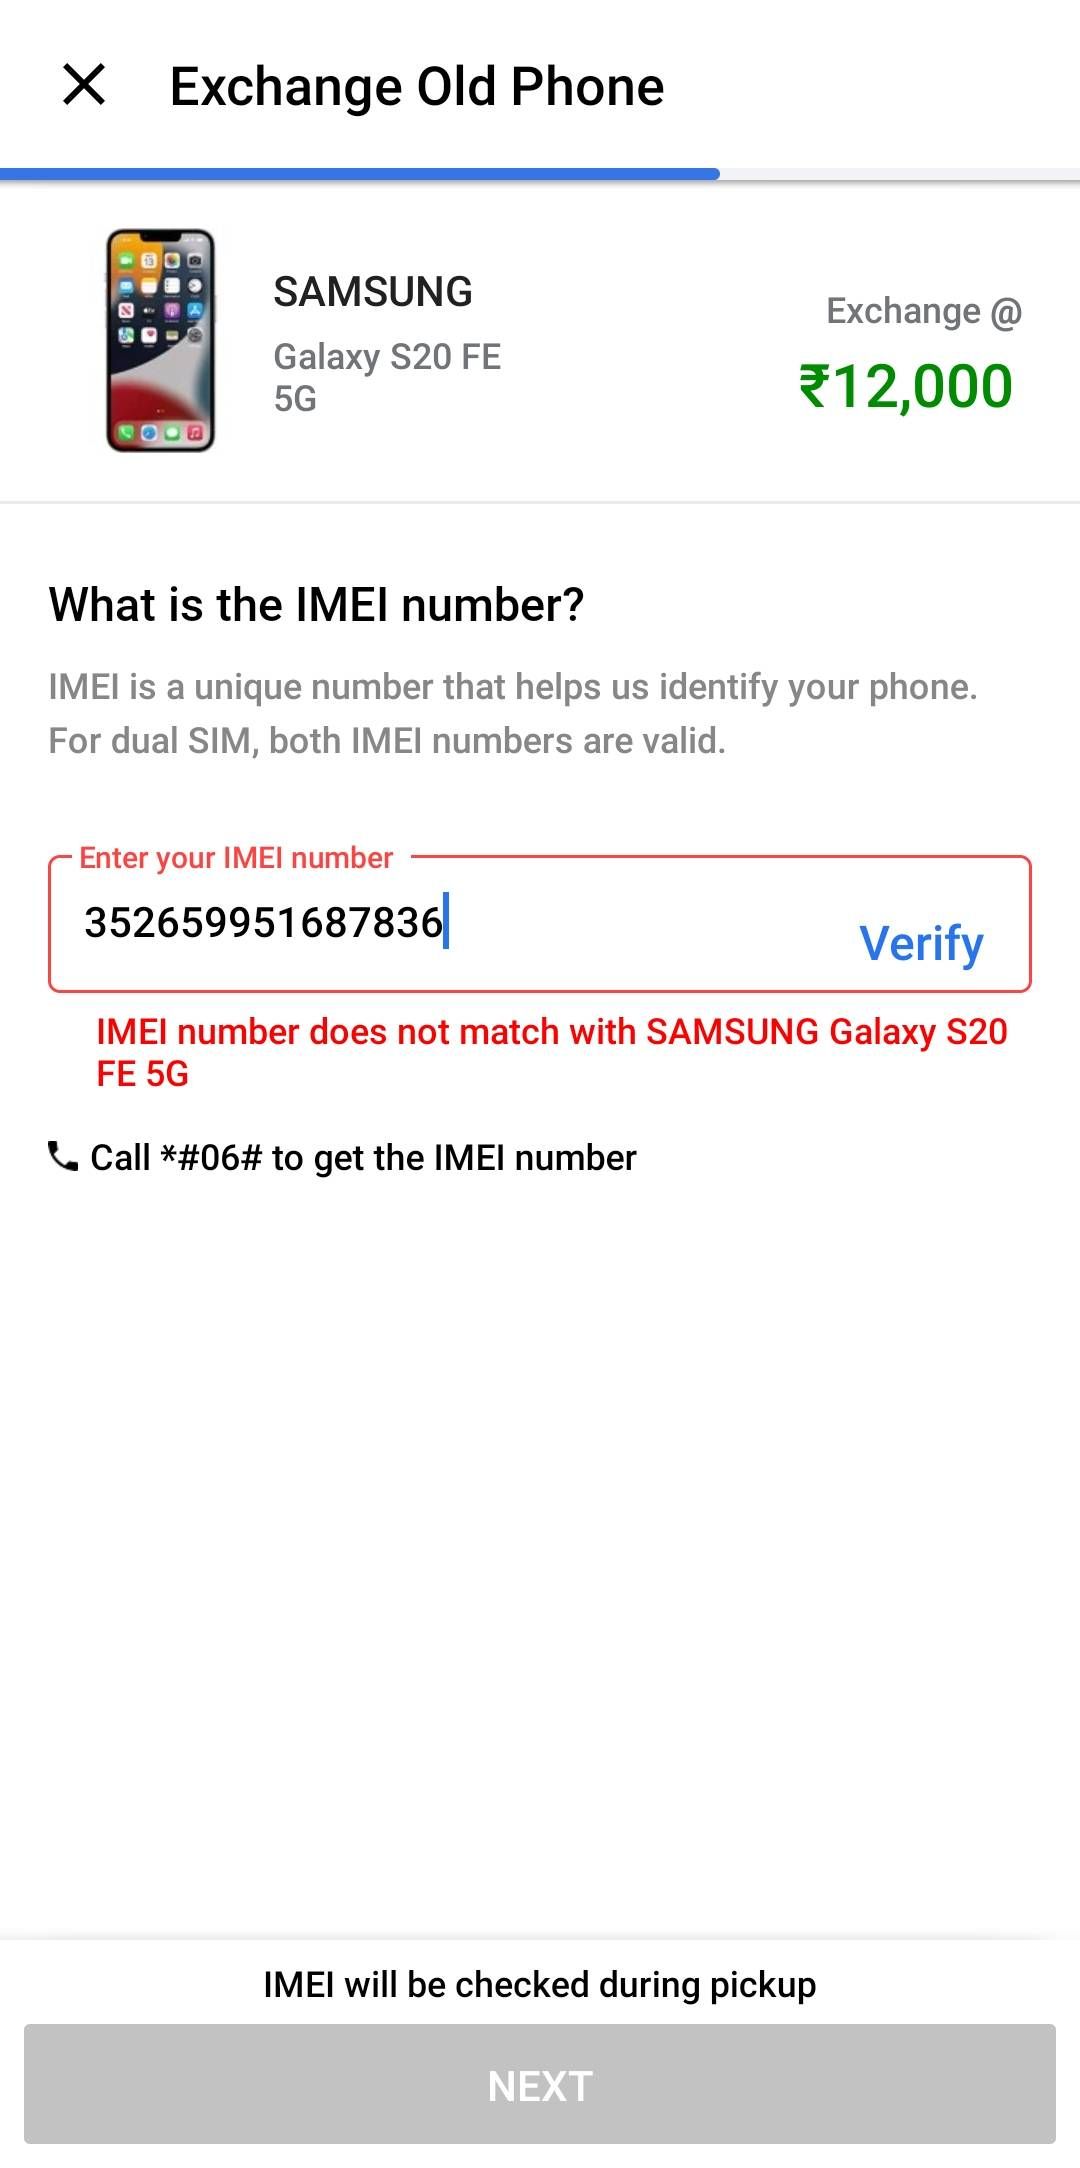 IMEI Number Does not Match - Samsung Members